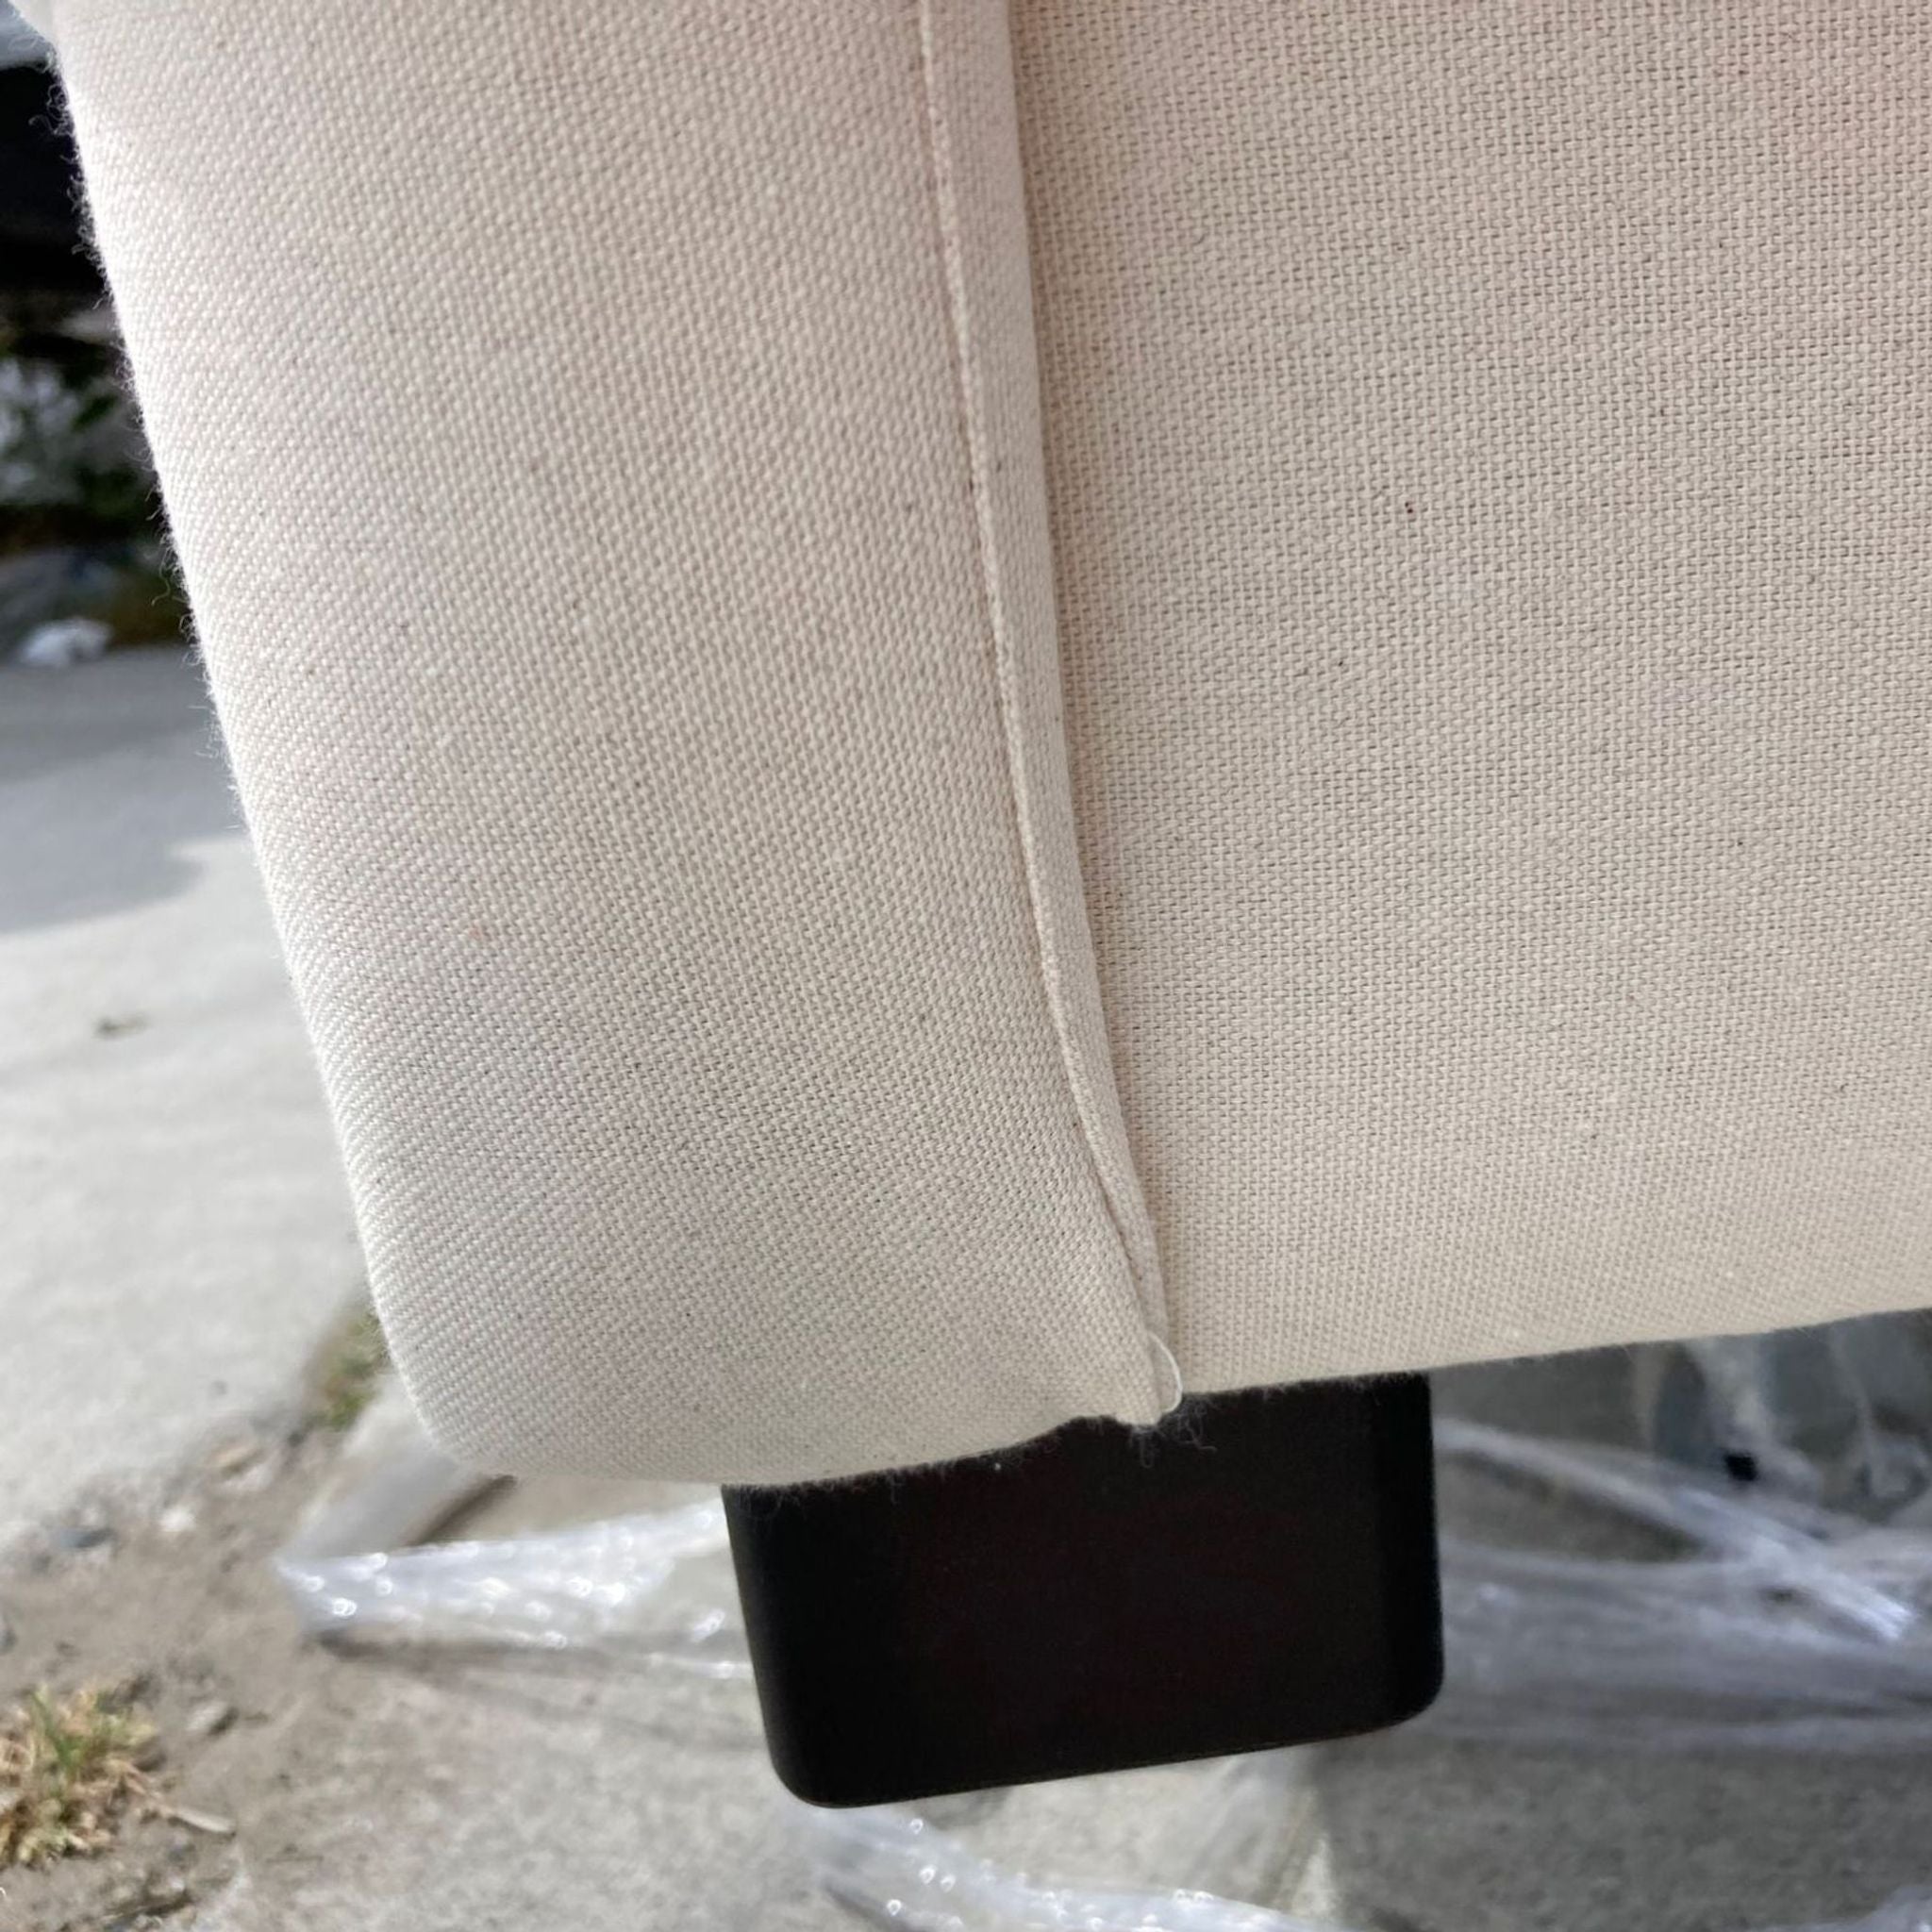 Close-up of a lounge chair leg with neutral upholstery, highlighting the fabric texture and dark wood finish.